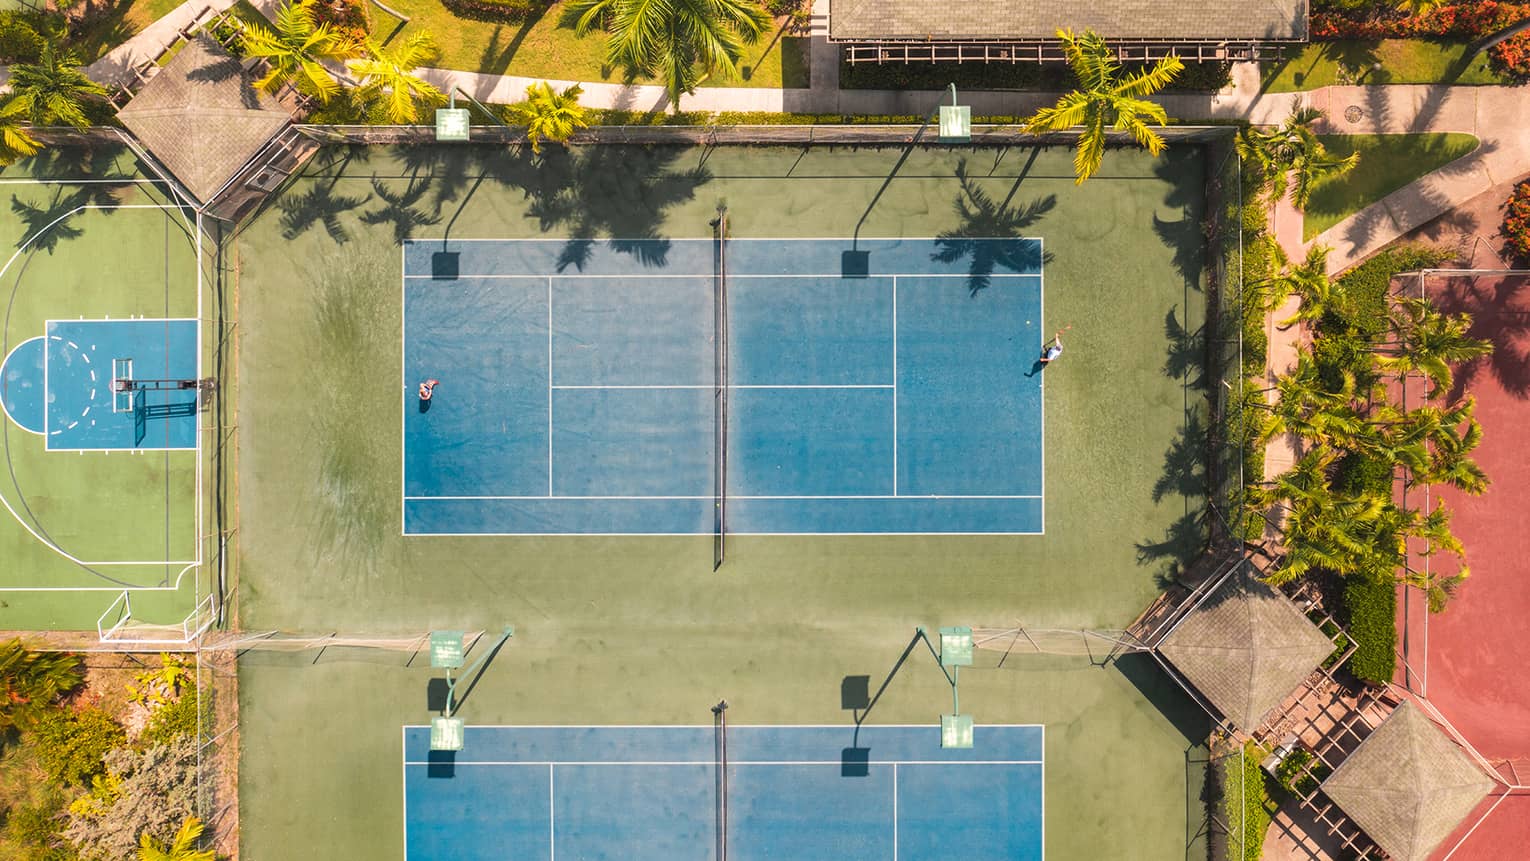 An aerial view of tennis courts surrounded by palm trees.